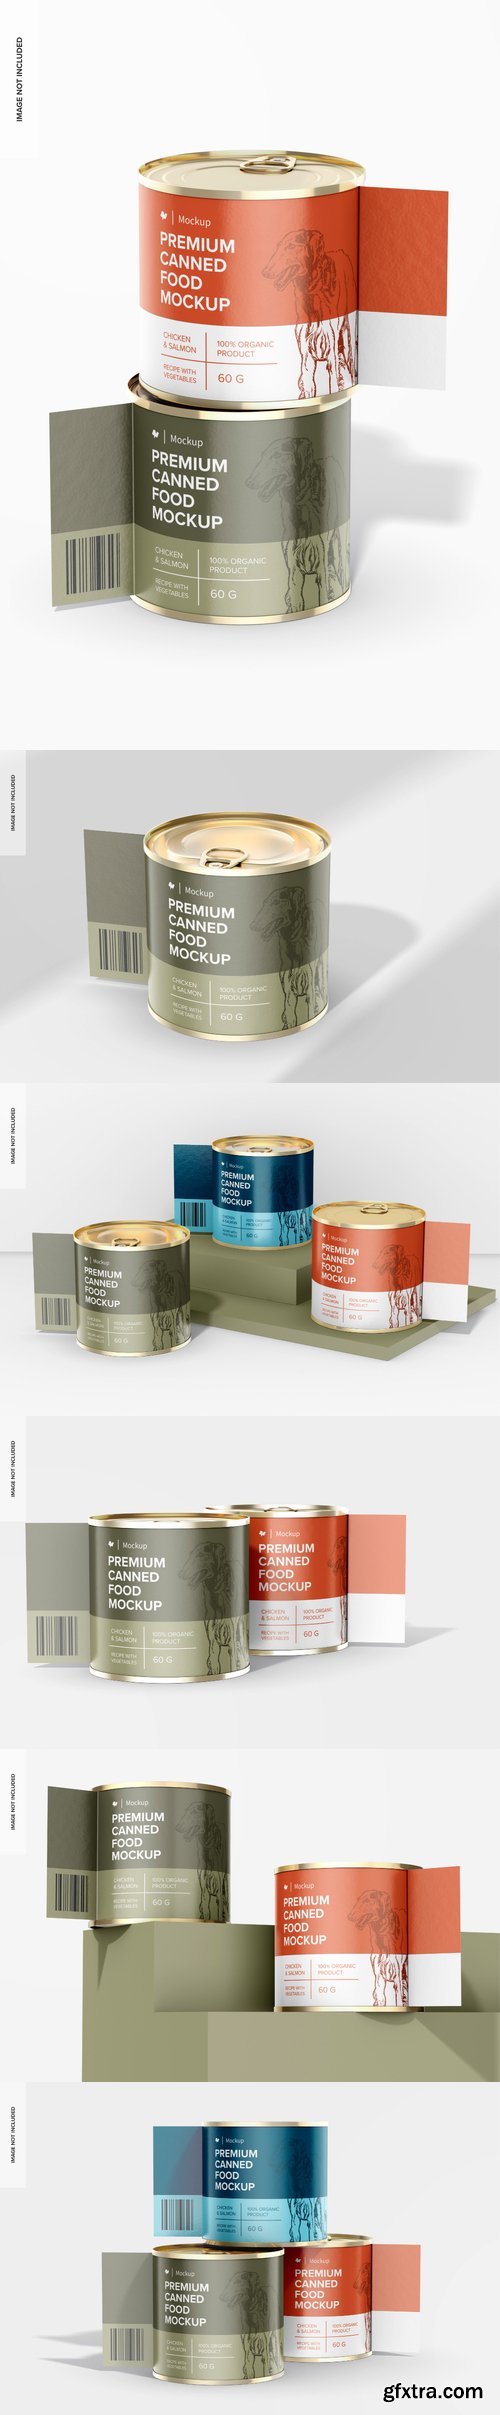 60 g food cans with label mockup